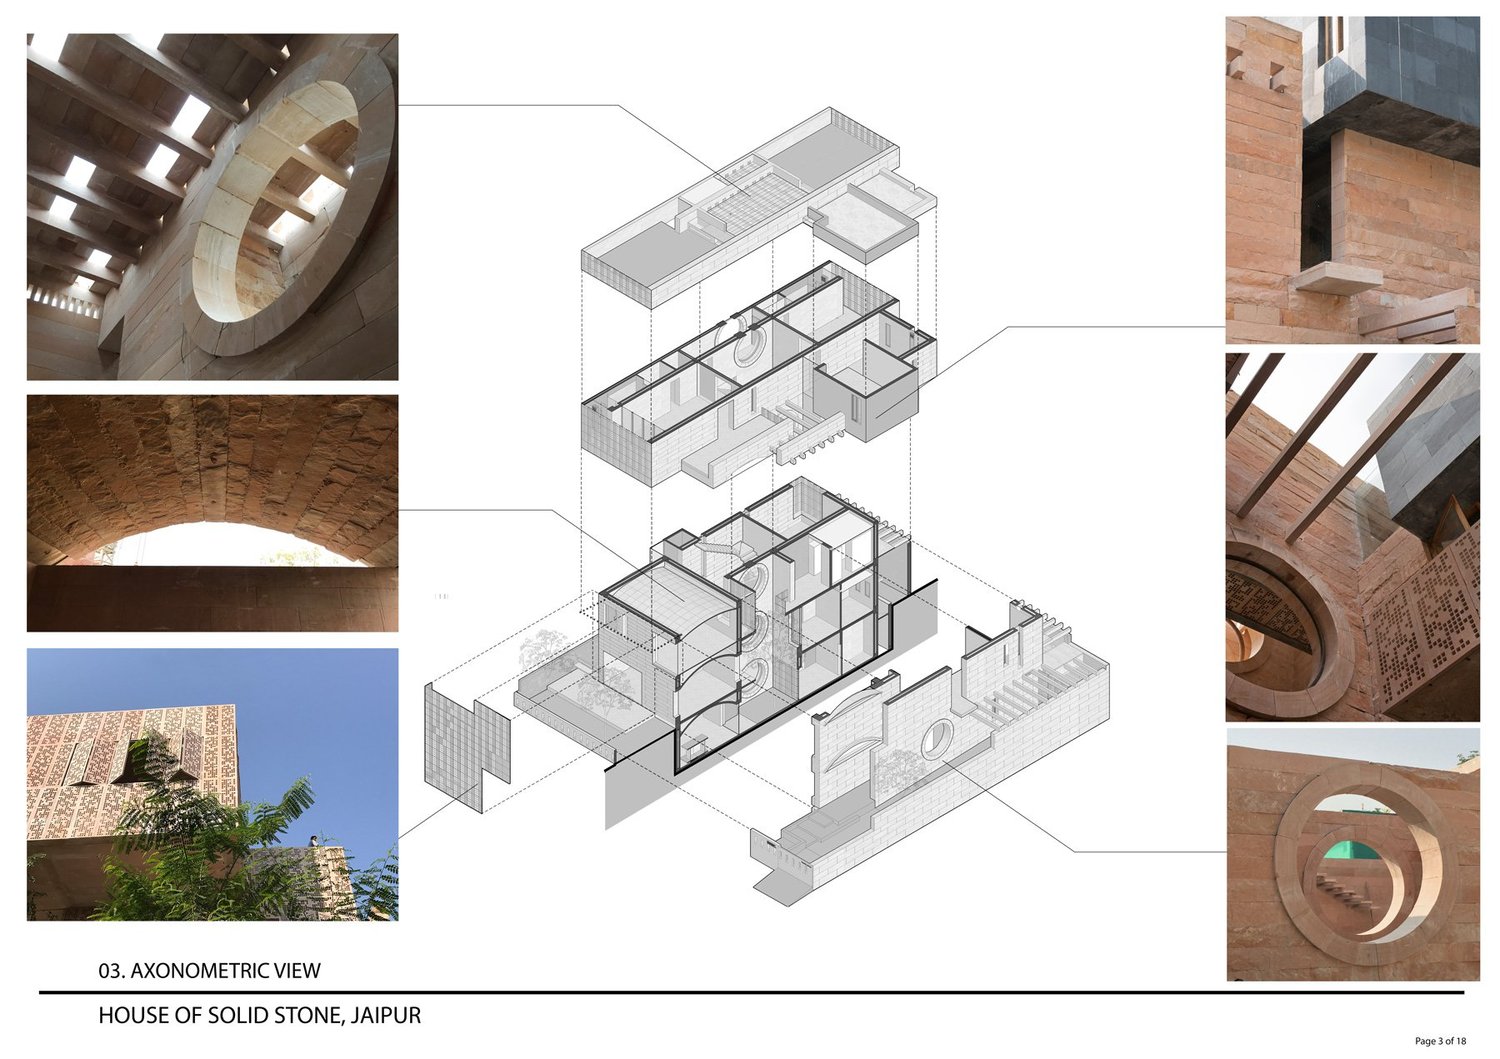 Various elements implementing traditional knowledge of building in Stone | Malik Architecture and Fabien Charuau